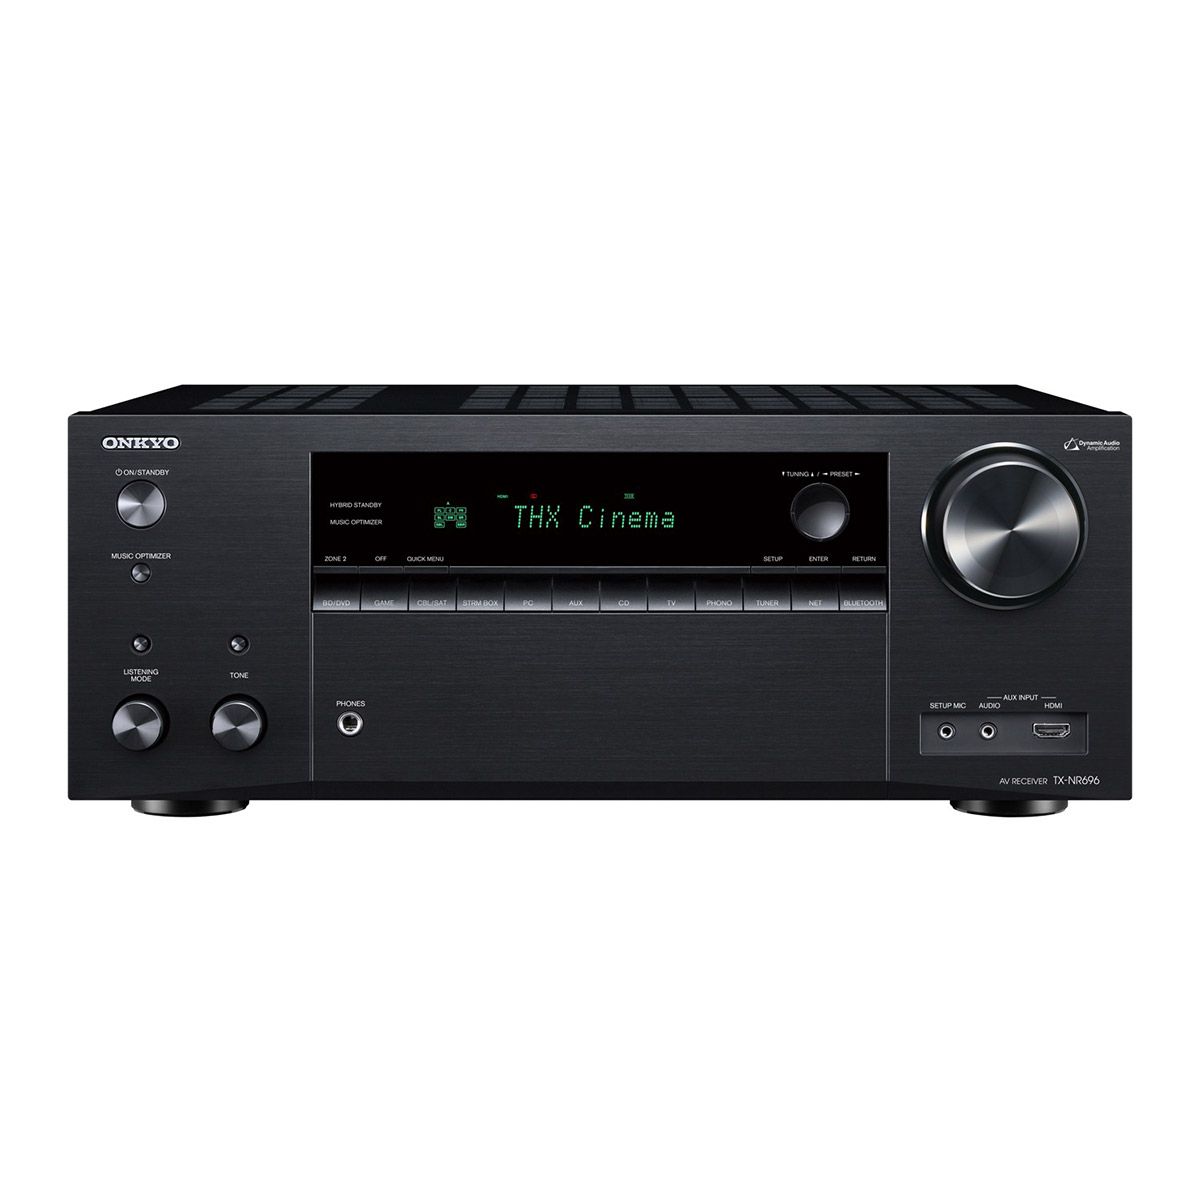 Onkyo TX-NR696 7.2 Channel Home Theater Receiver